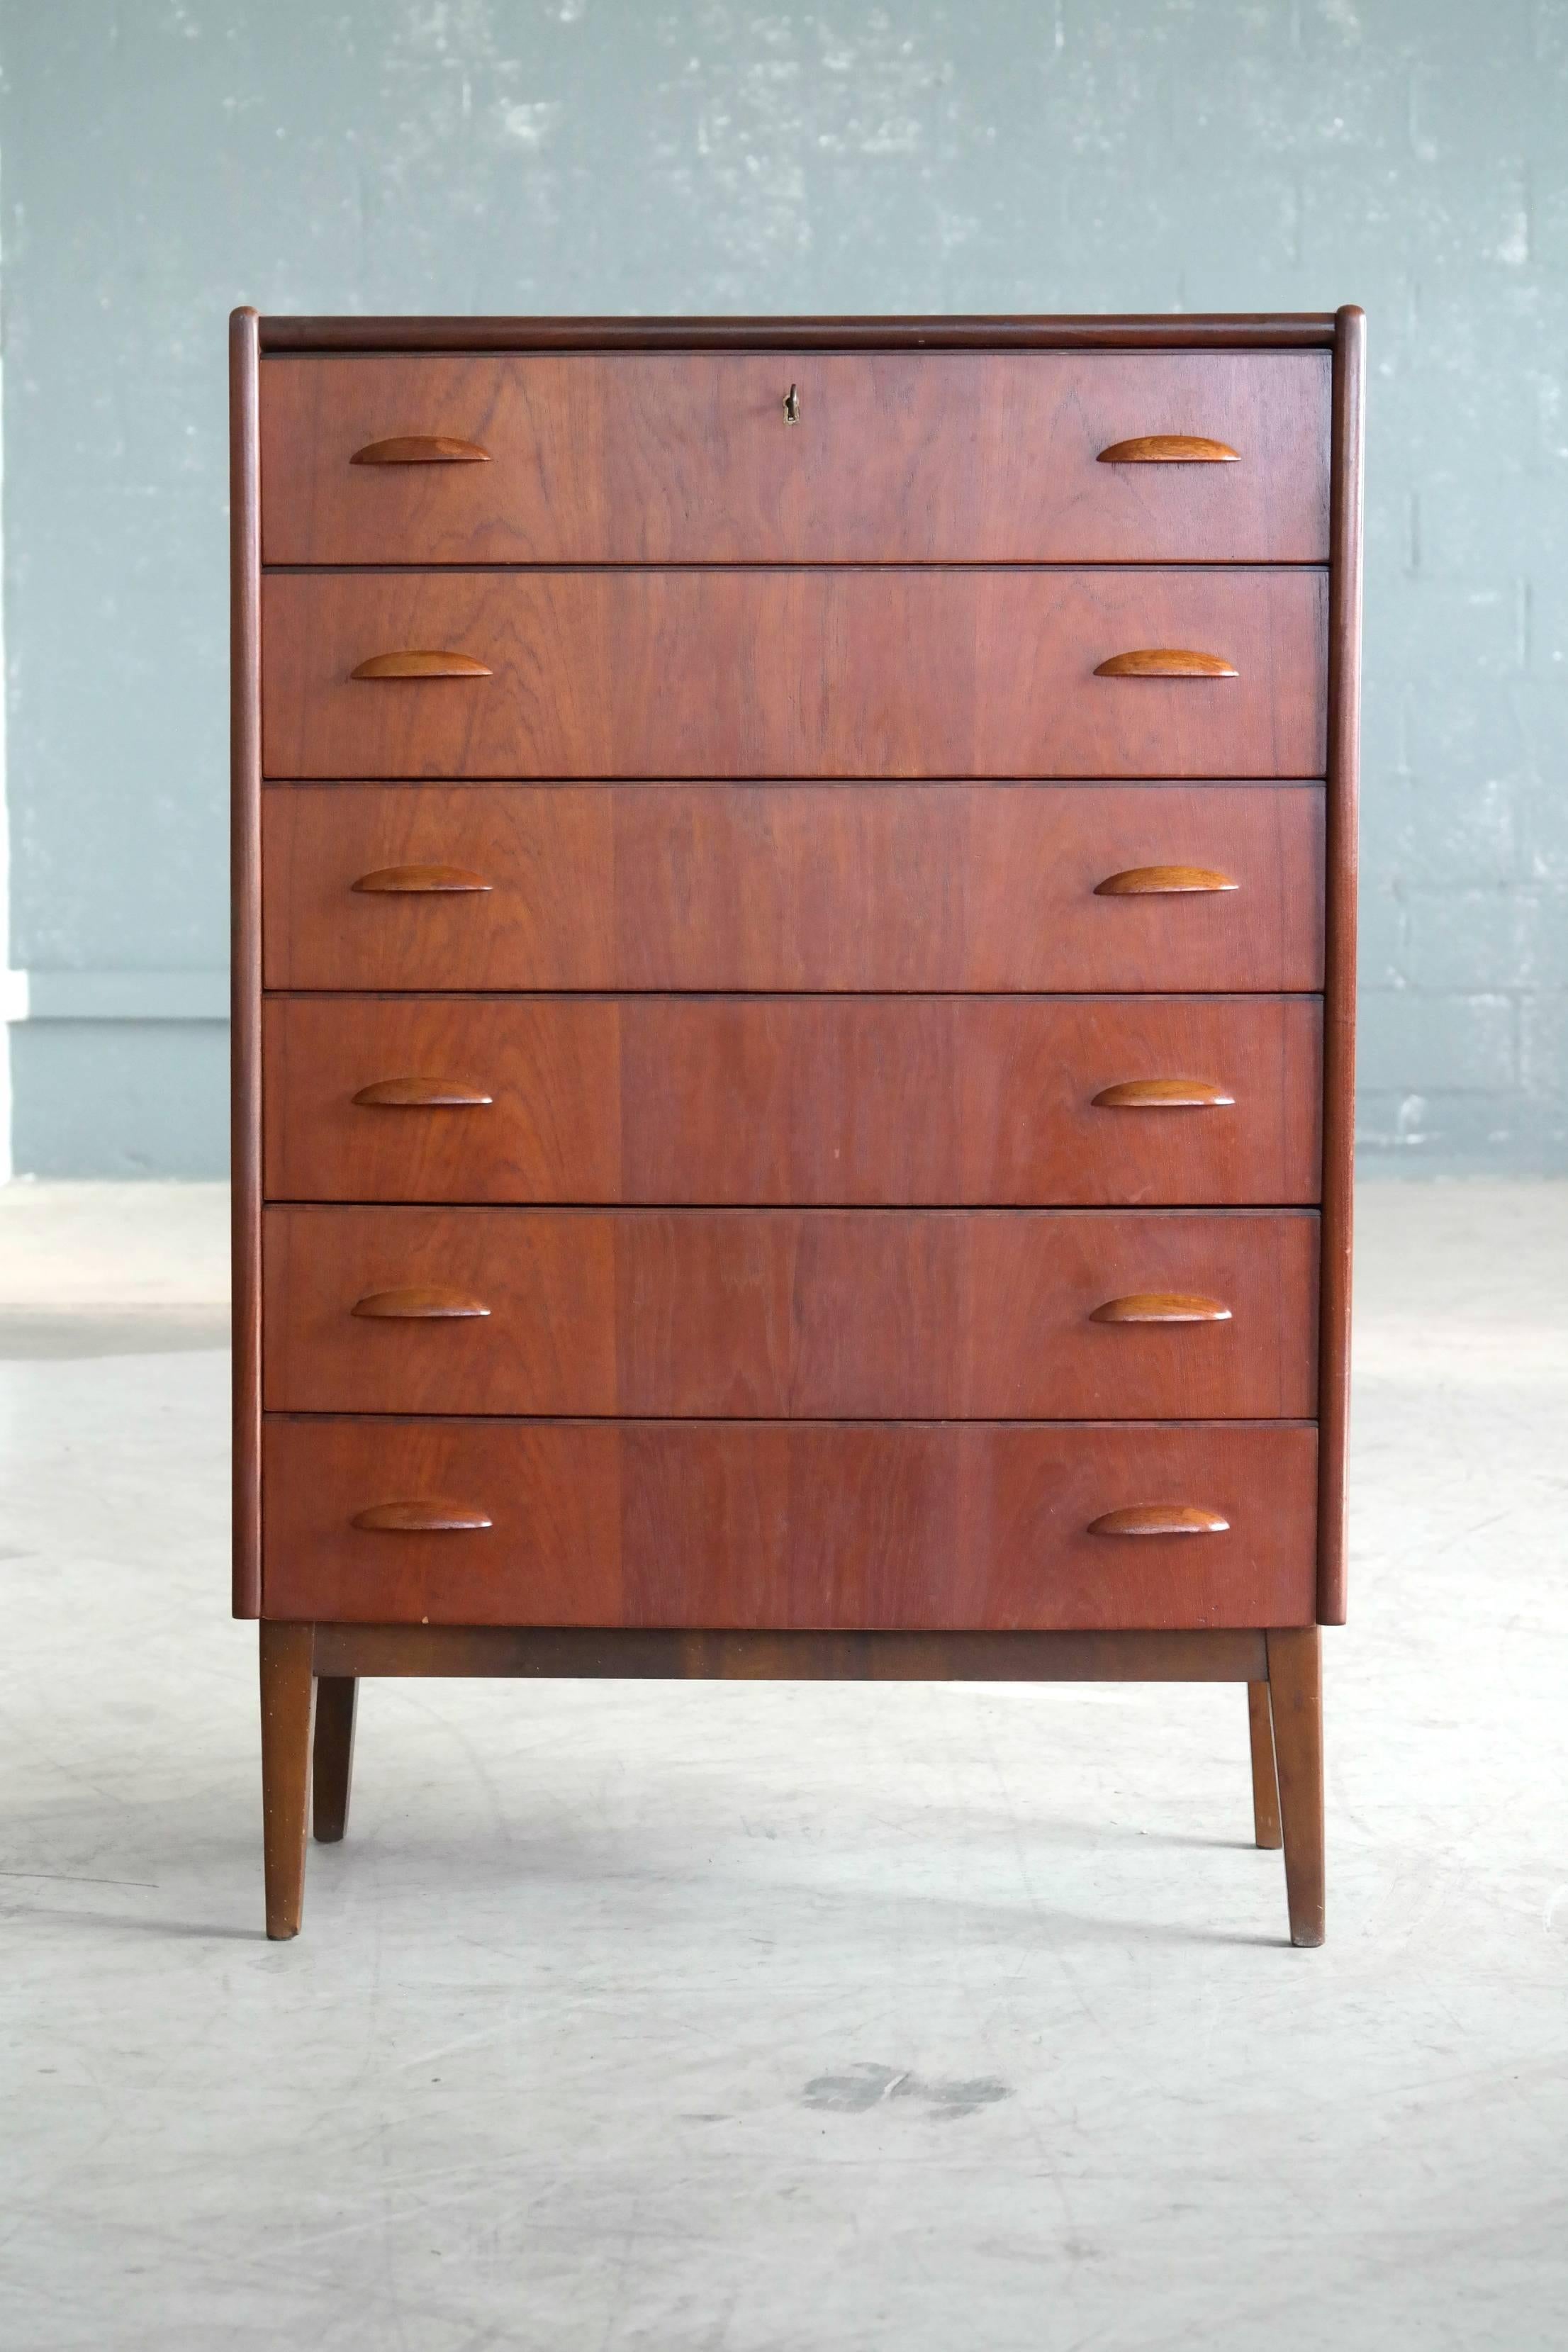 Beautiful bow-front Danish teak high-boy dresser or chest of drawers designed by Kai Kristiansen in the 1960s. Teak veneer with edges of solid teak and elliptical pulls carved from solid teak raised on solid tapered teak legs. All drawers solid ply.